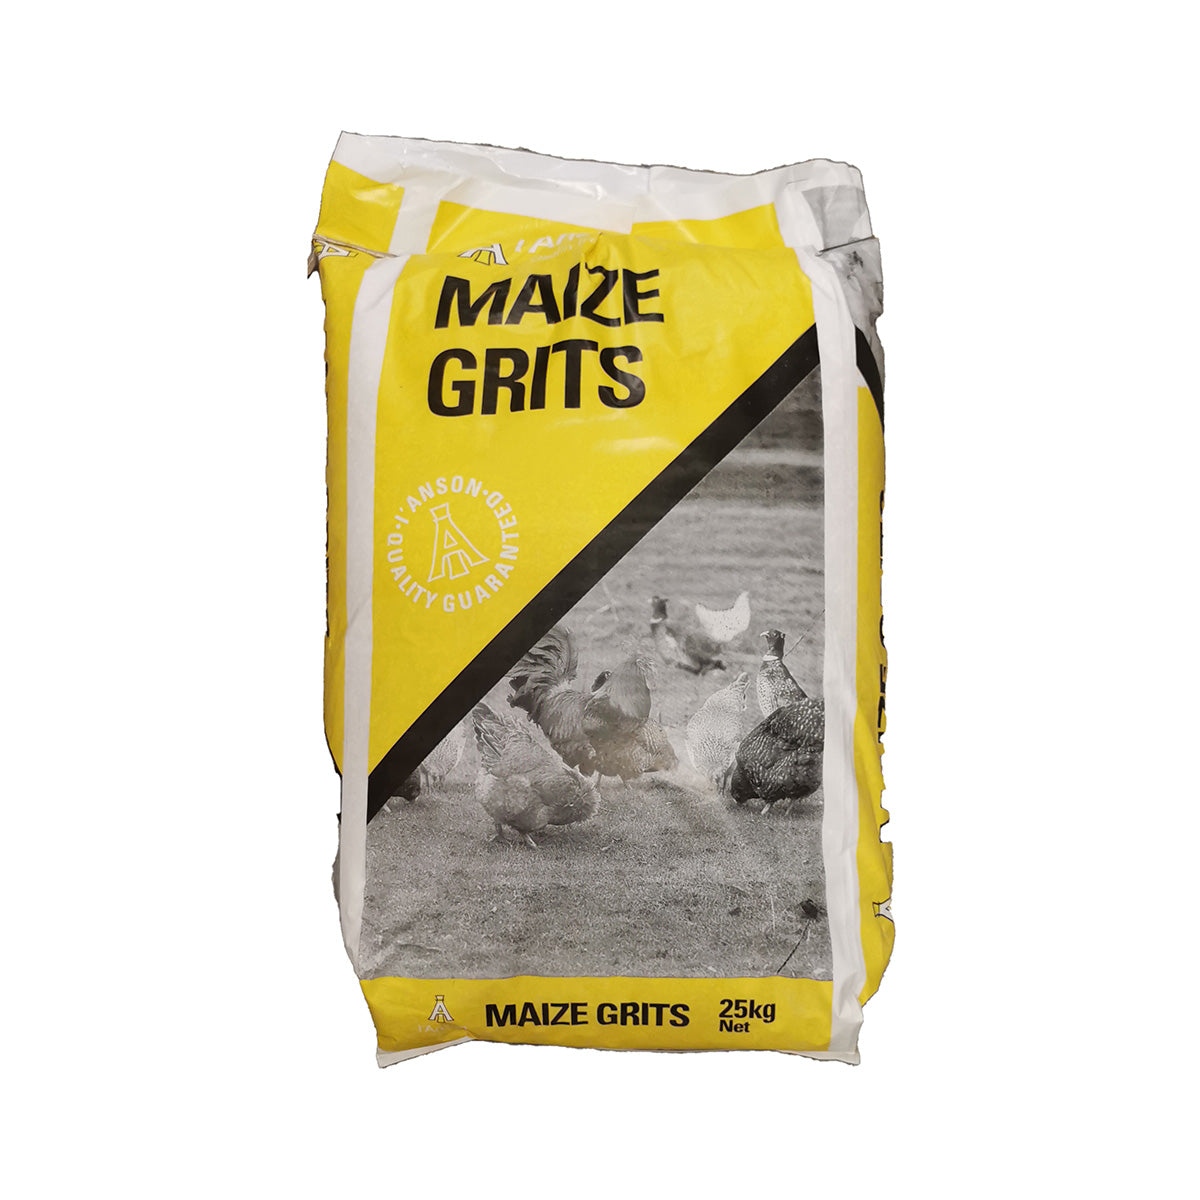 I'Ansons Maize Grit Poultry Feed 25kg